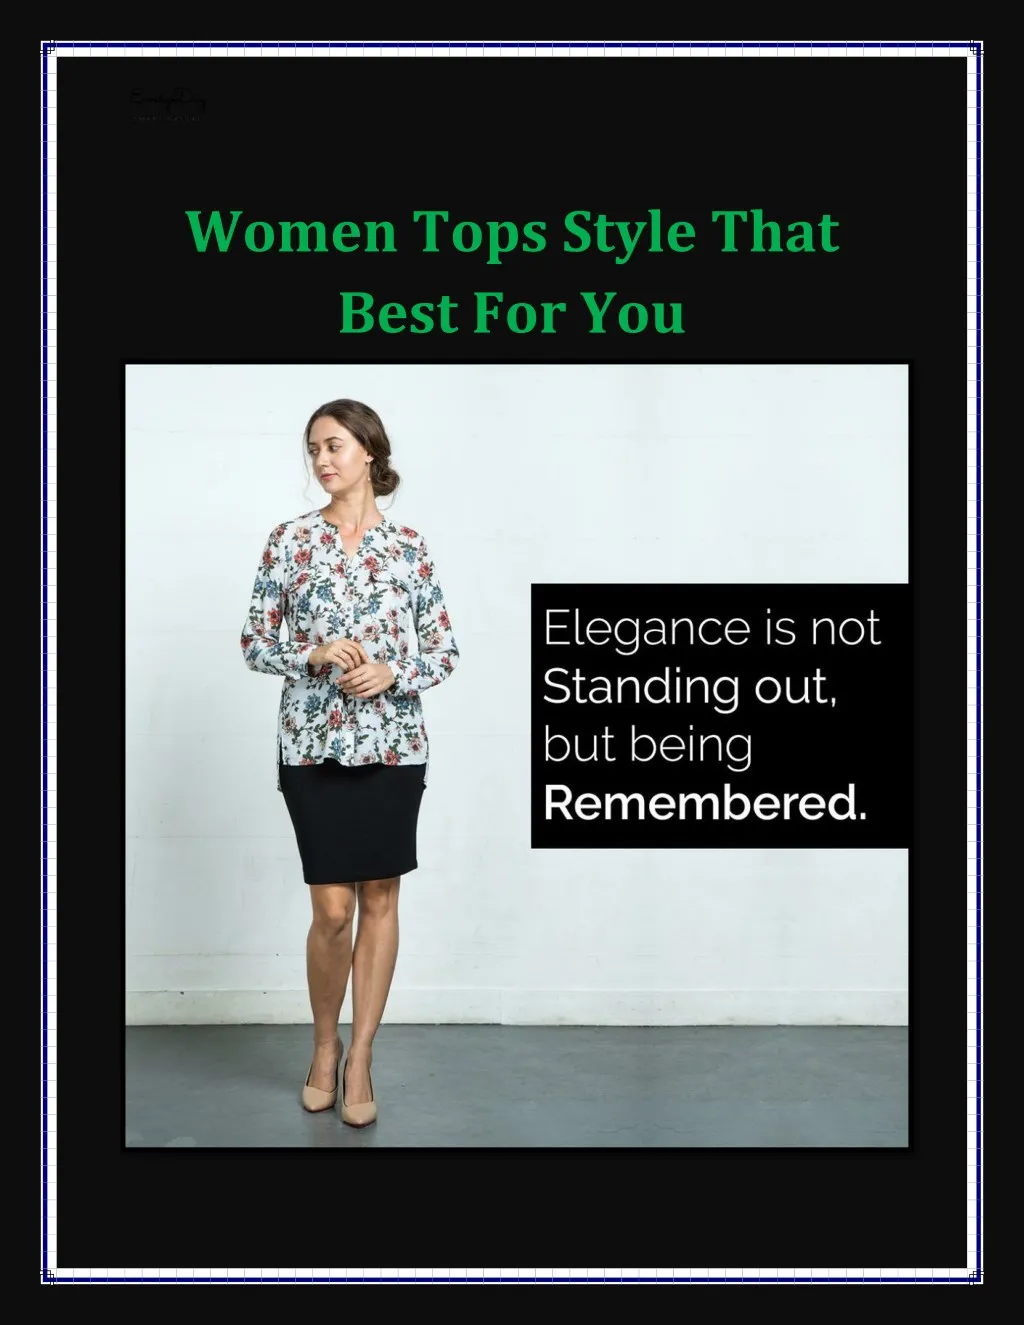 women tops style that best for you